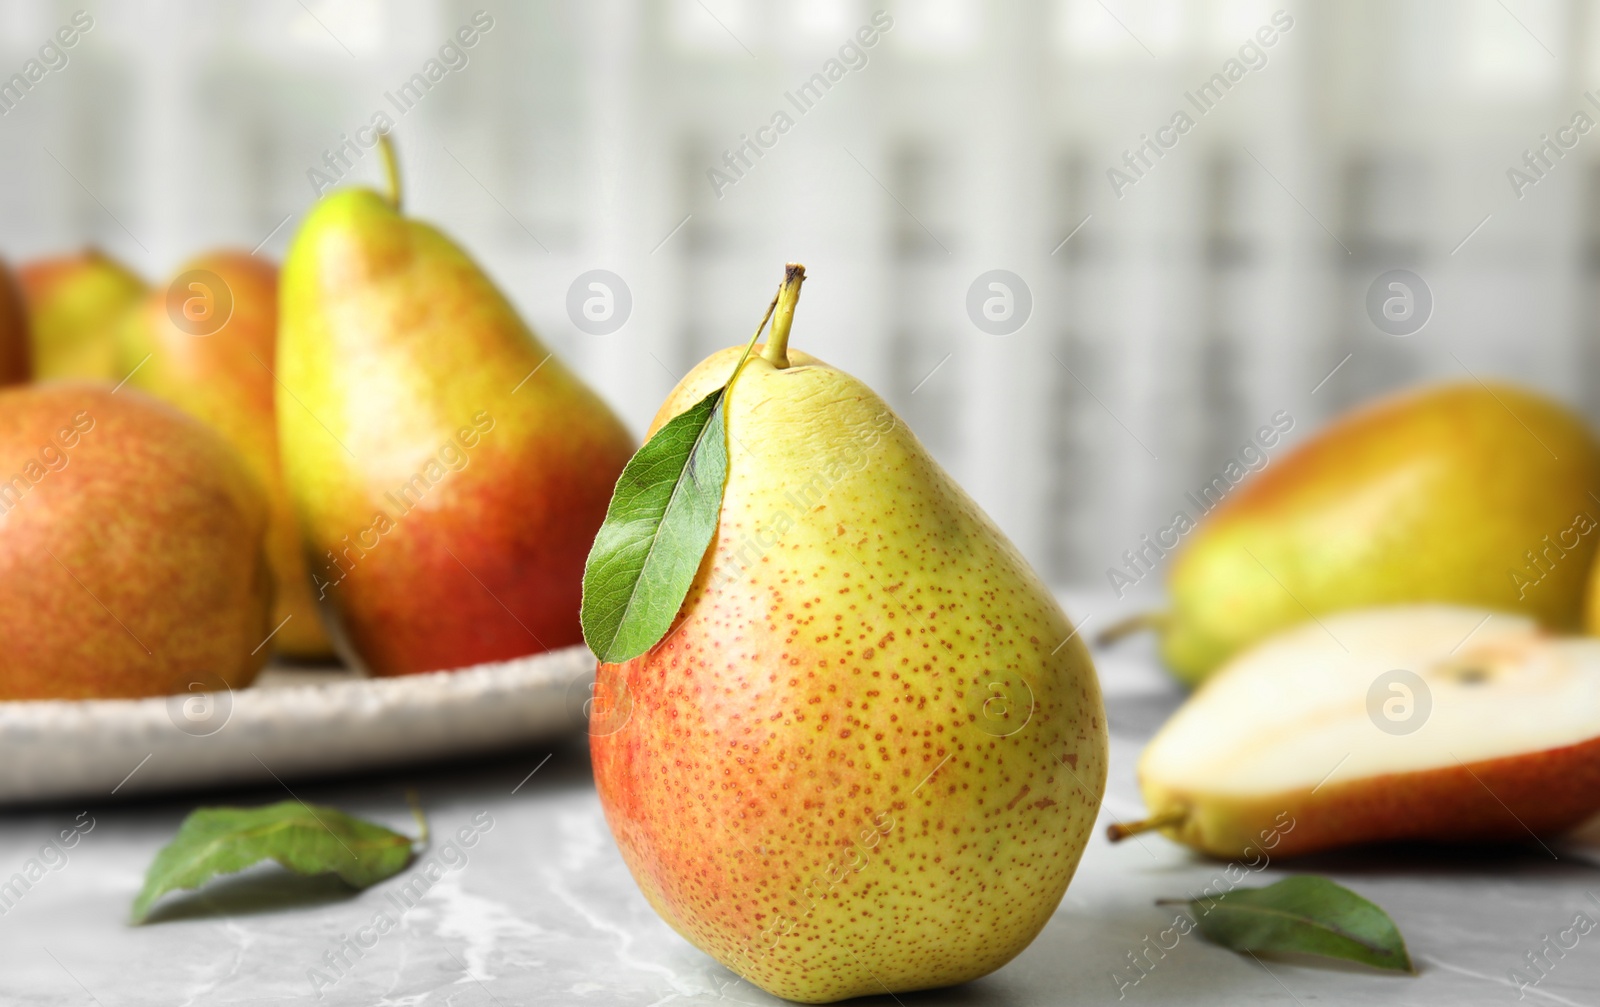 Photo of Ripe juicy pears on grey stone table against light background